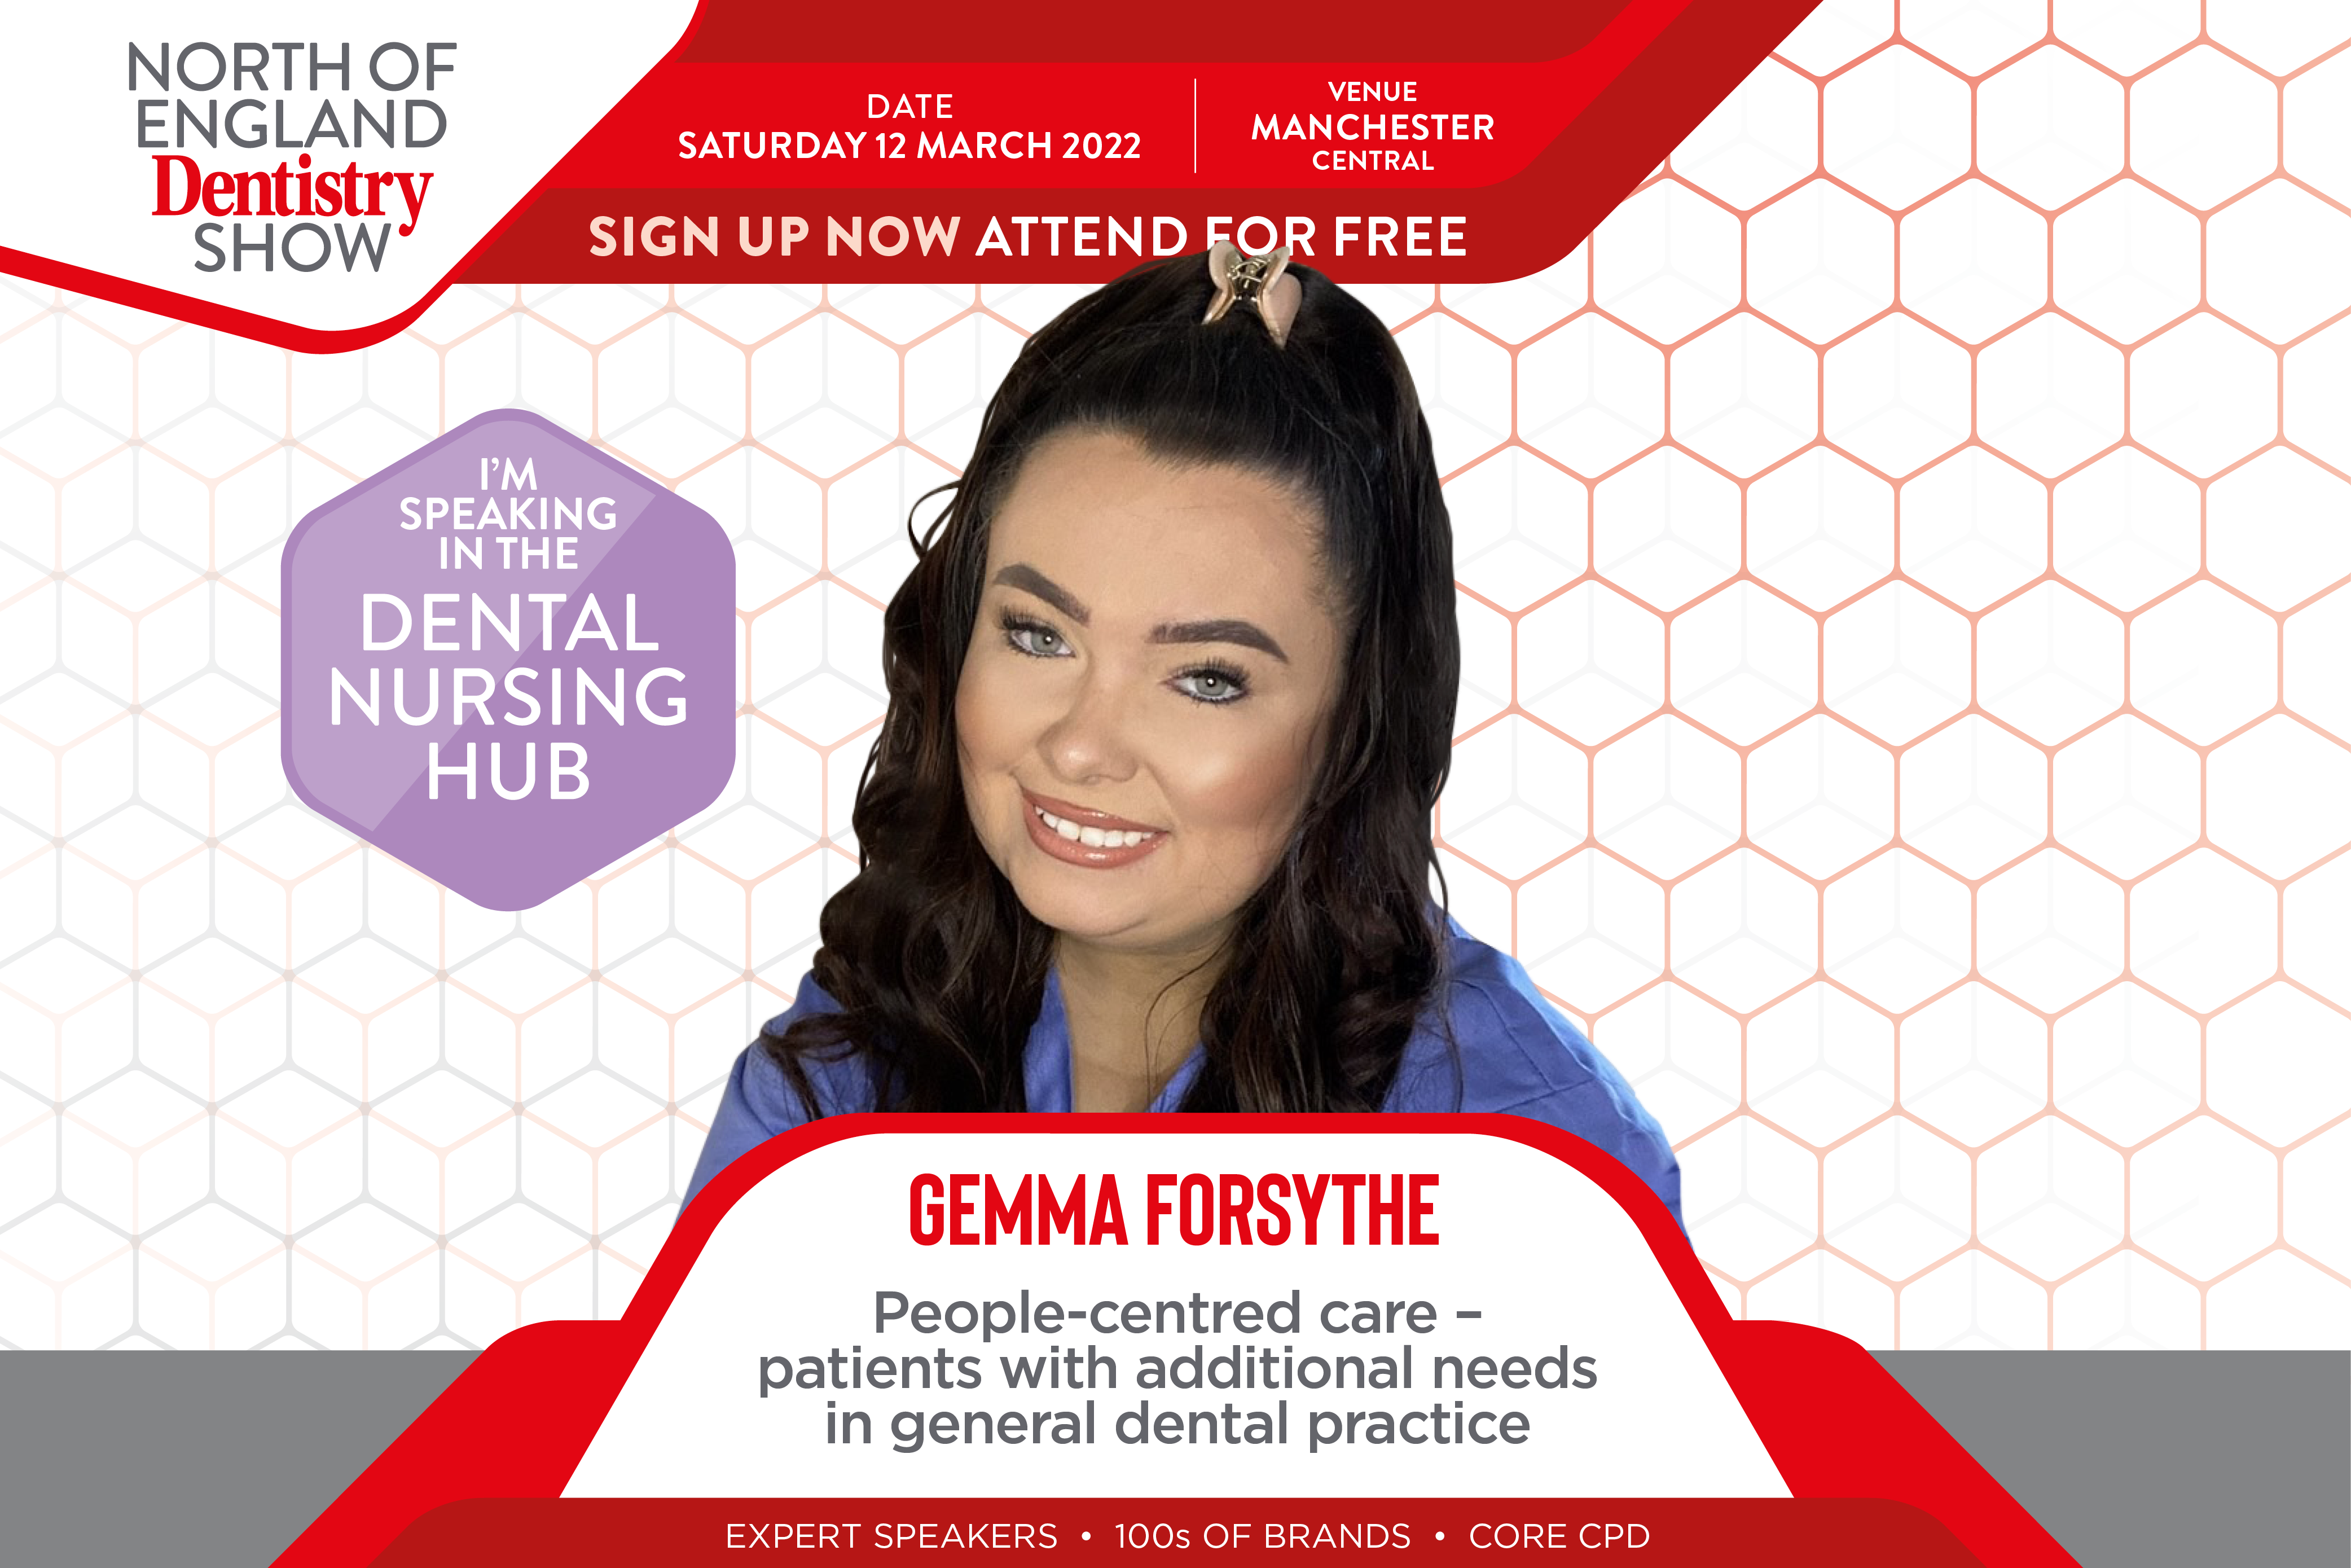 North of England Dentistry Show – Gemma Forsythe on patient-centred care